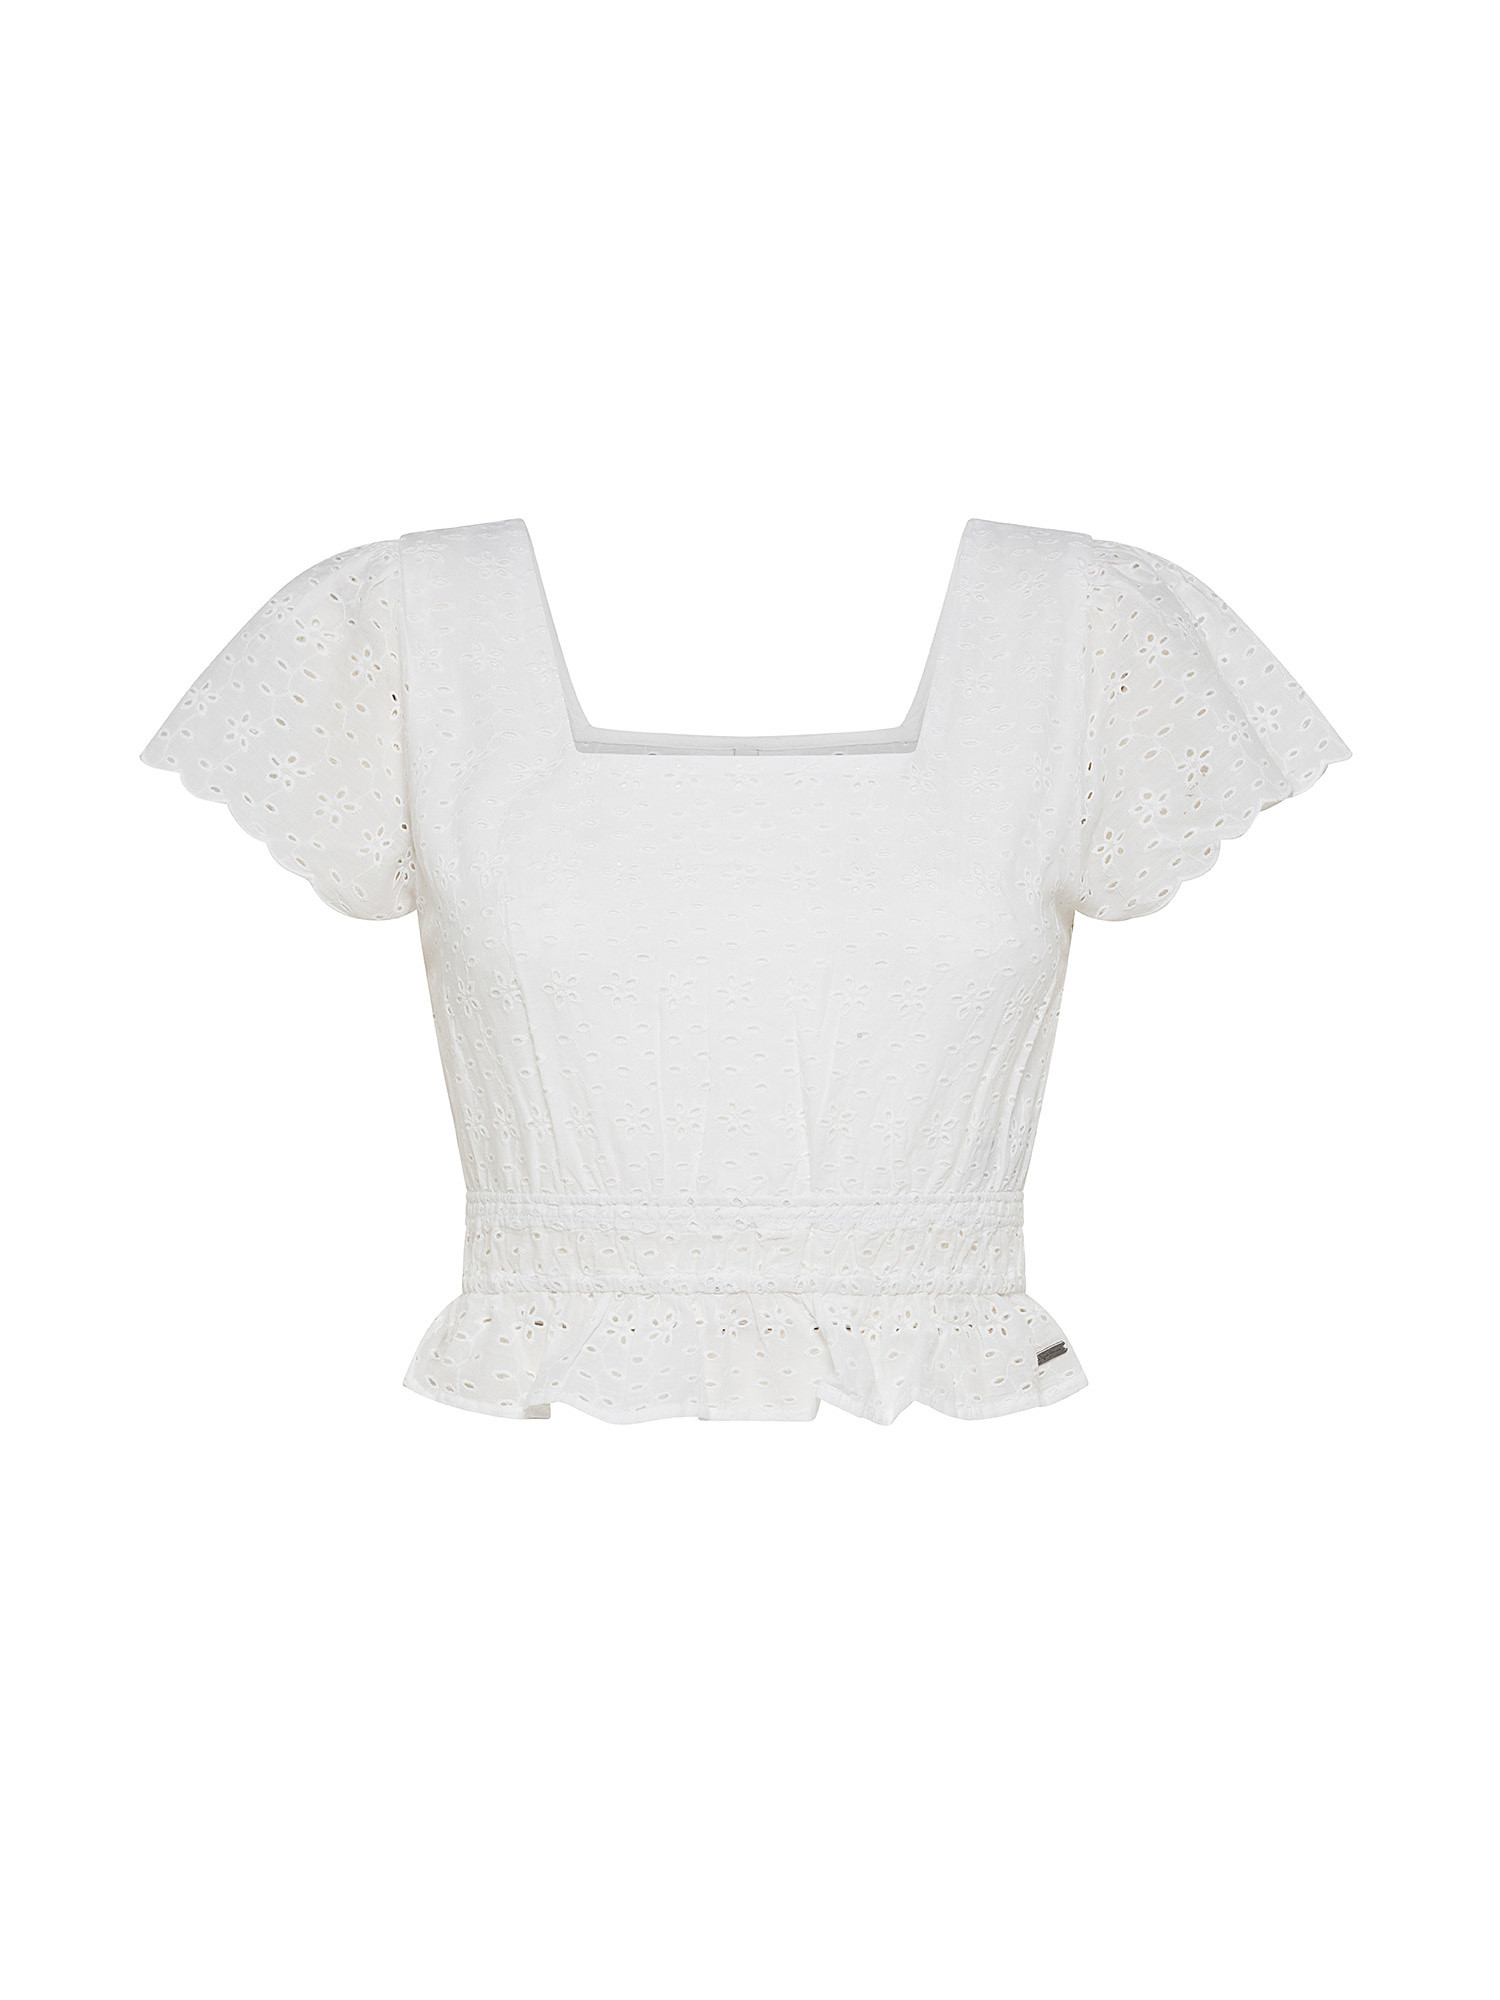 Pepe Jeans - Sangallo lace top in cotton, White, large image number 0